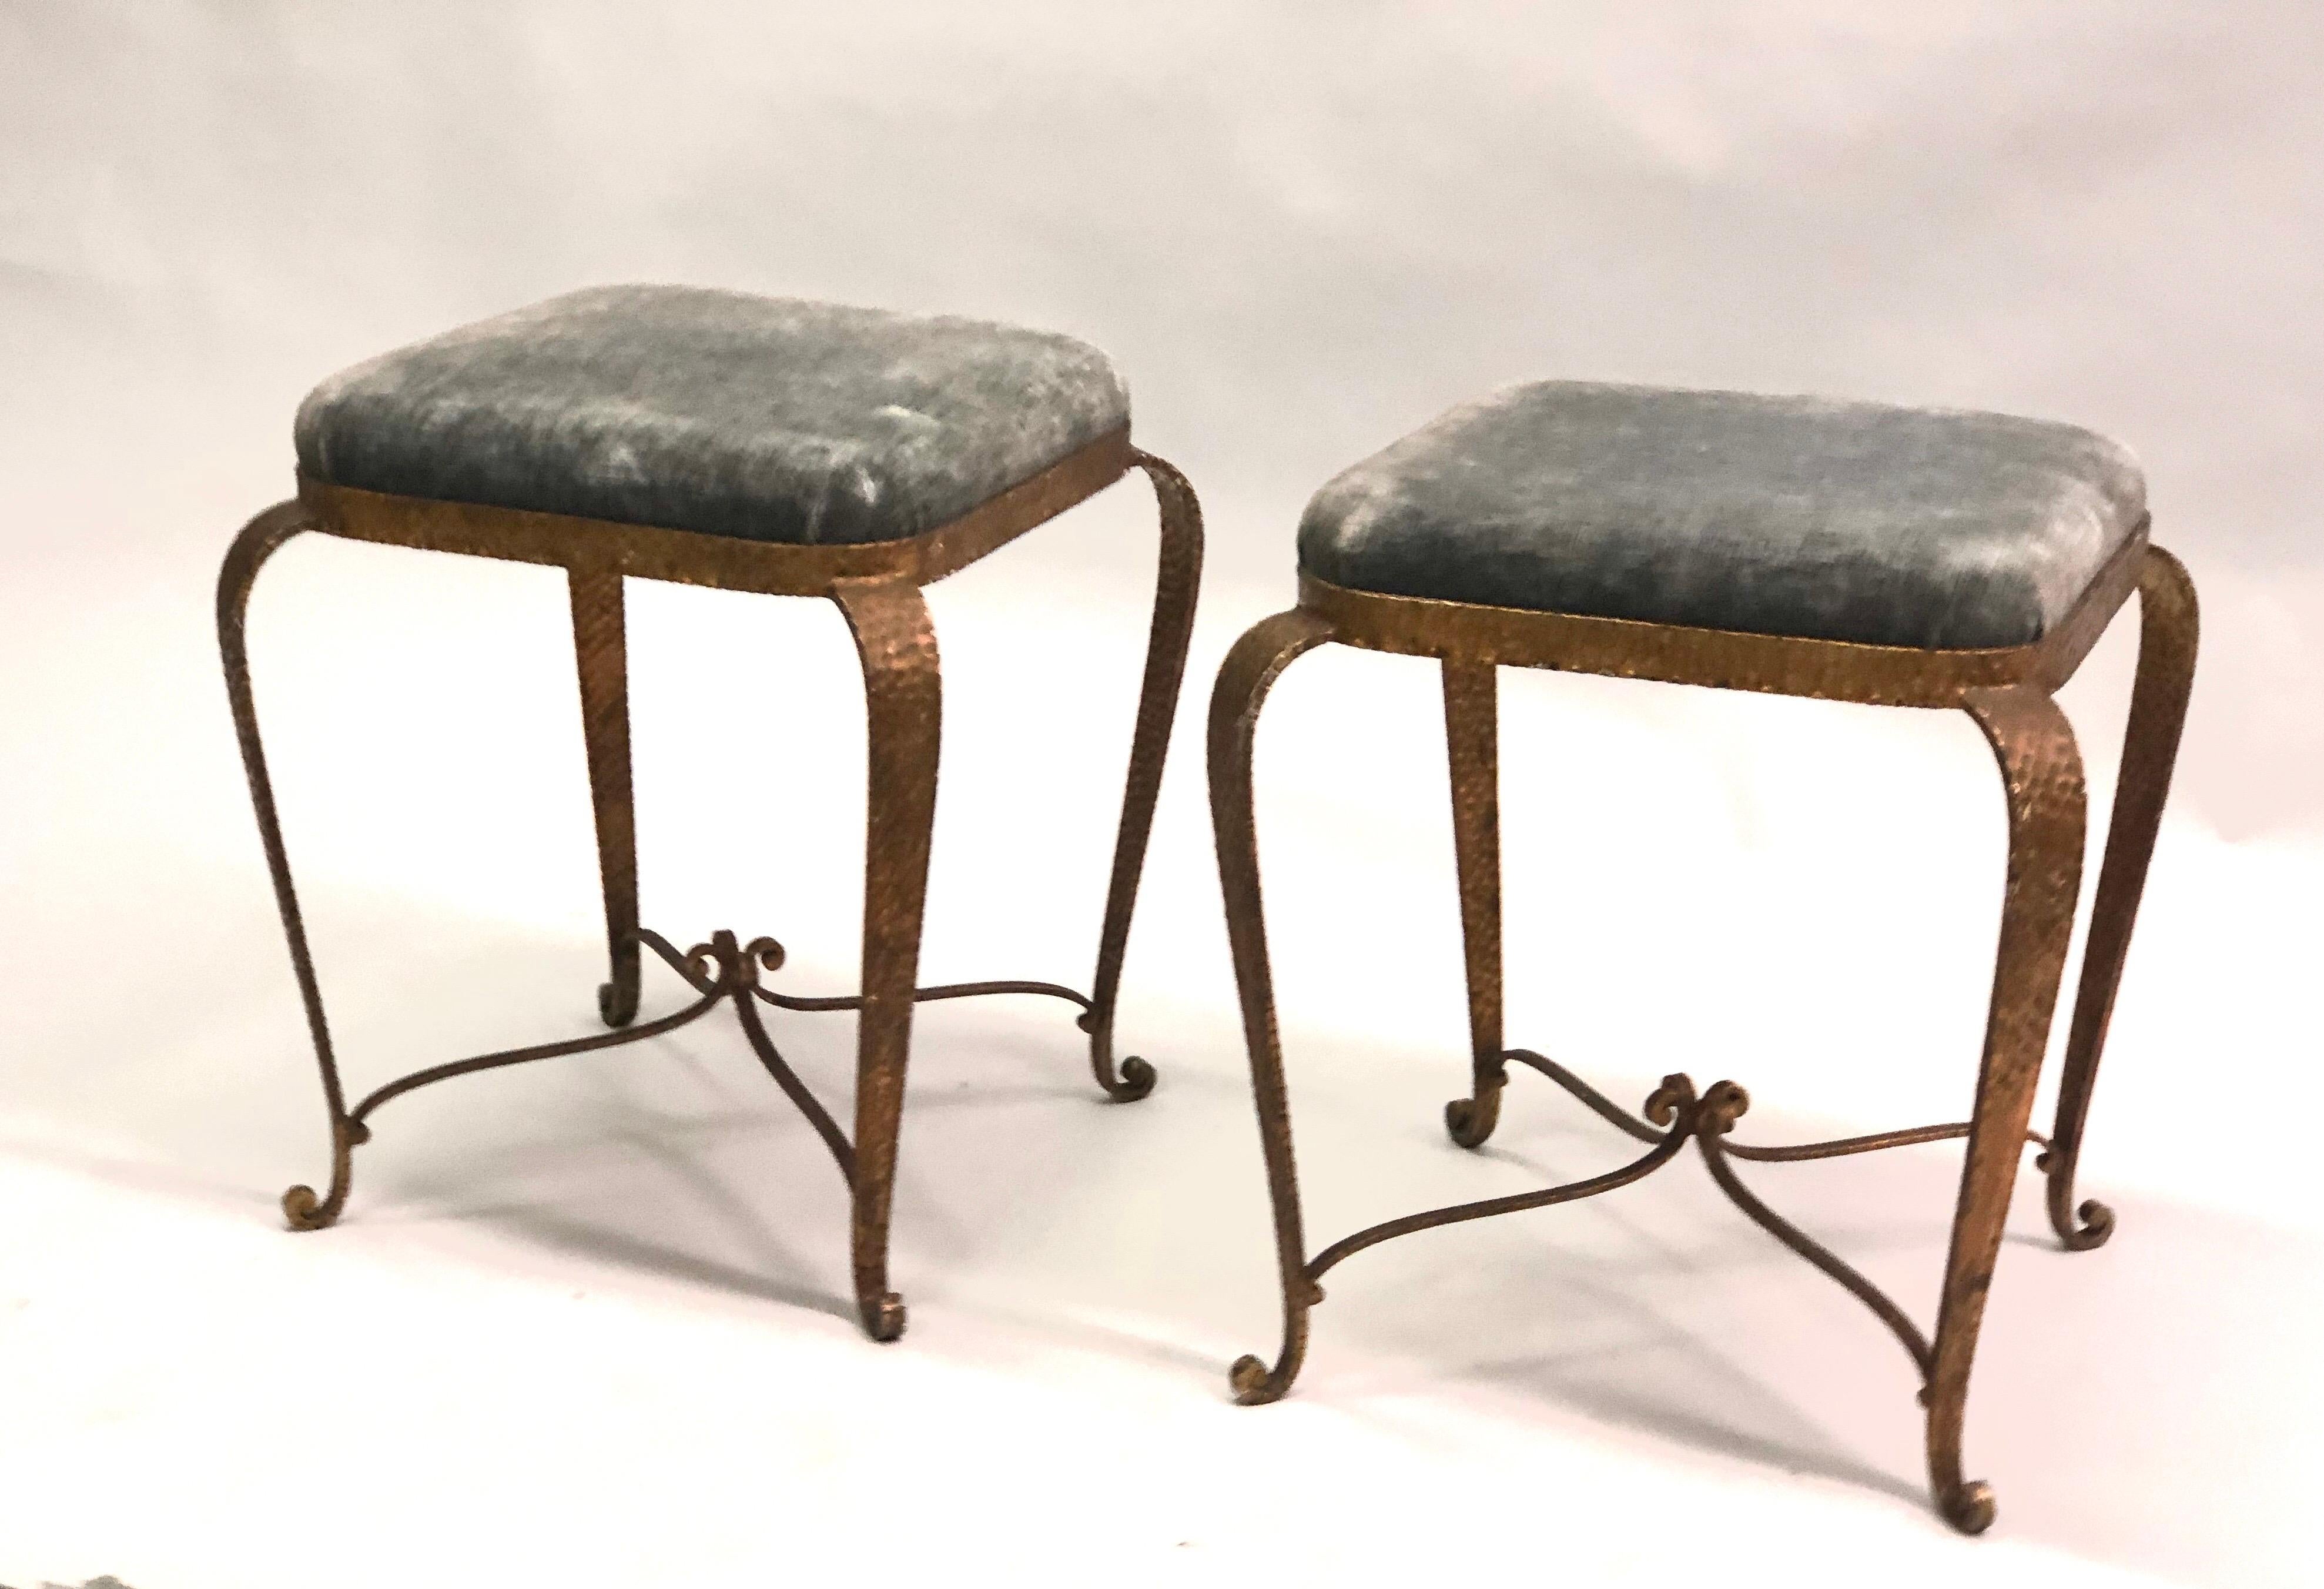 Italian Modern Neoclassical Gilt Iron Stools / Benches by Pier Luigi Colli, Pair In Good Condition For Sale In New York, NY